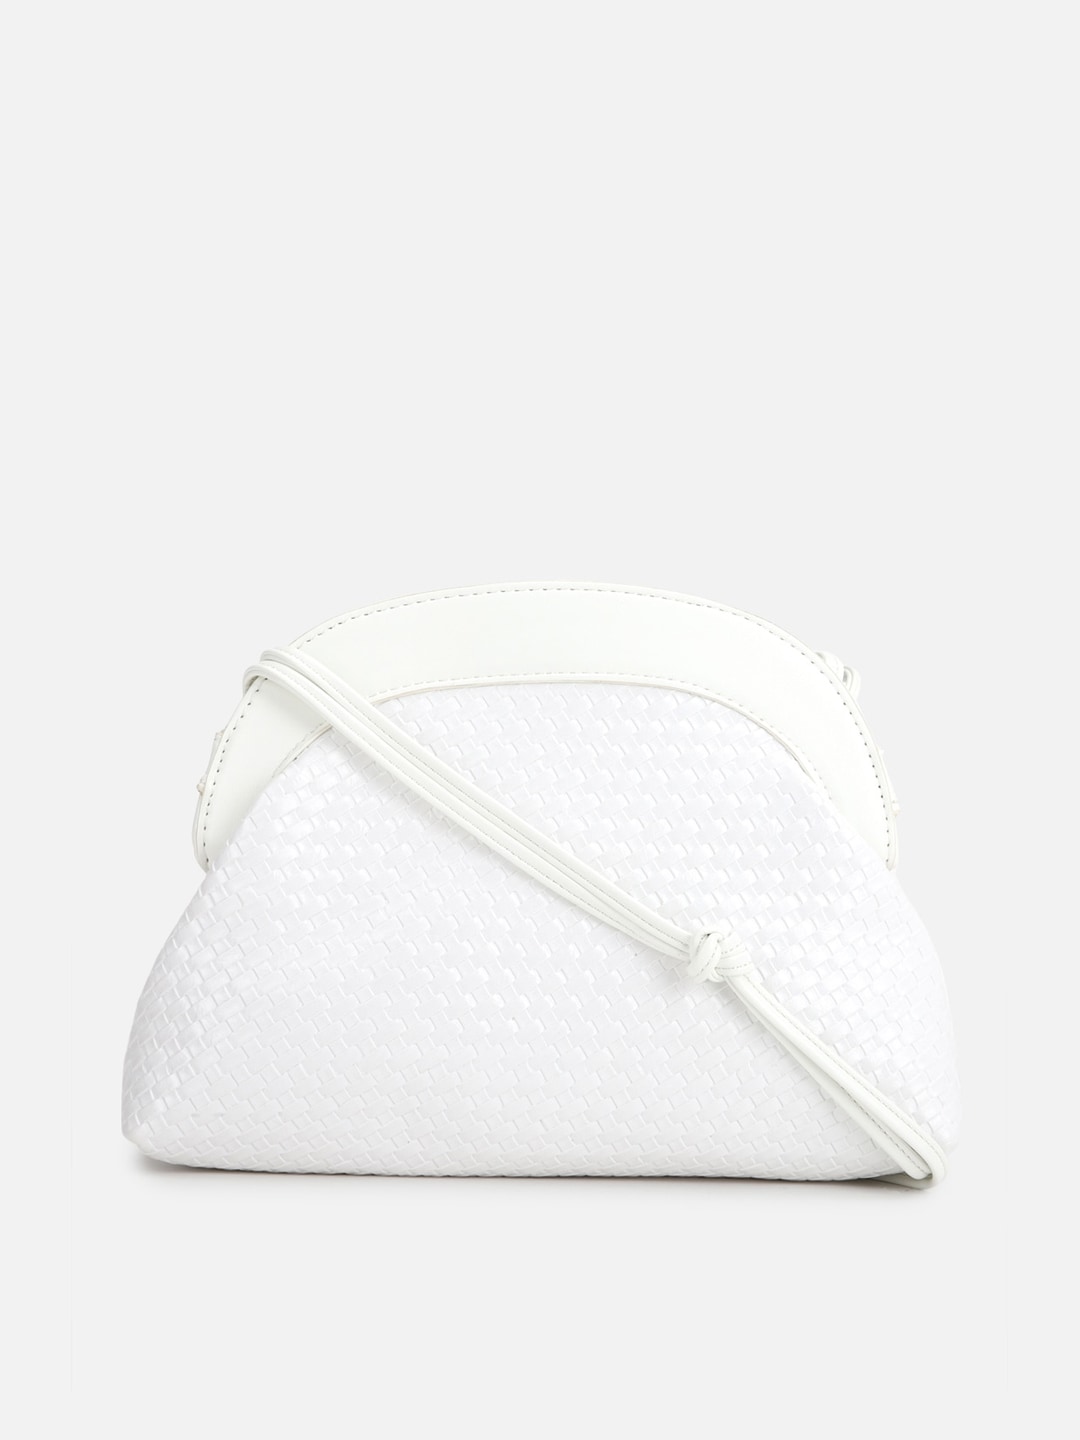 FOREVER 21 White PU Half Moon Sling Bag with Quilted Price in India